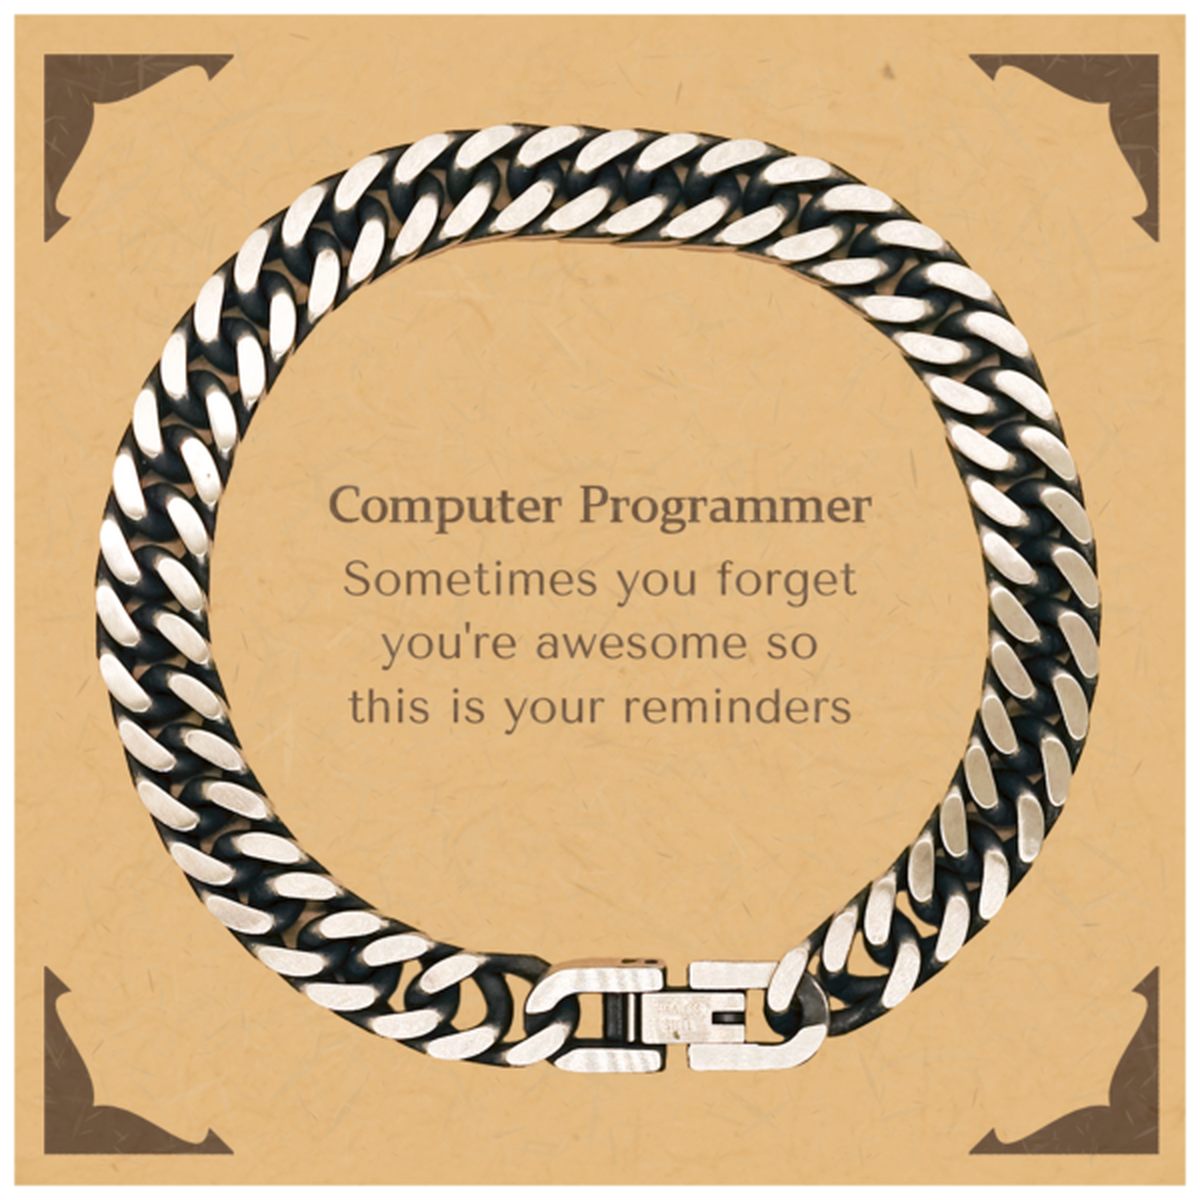 Sentimental Computer Programmer Cuban Link Chain Bracelet, Computer Programmer Sometimes you forget you're awesome so this is your reminders, Graduation Christmas Birthday Gifts for Computer Programmer, Men, Women, Coworkers